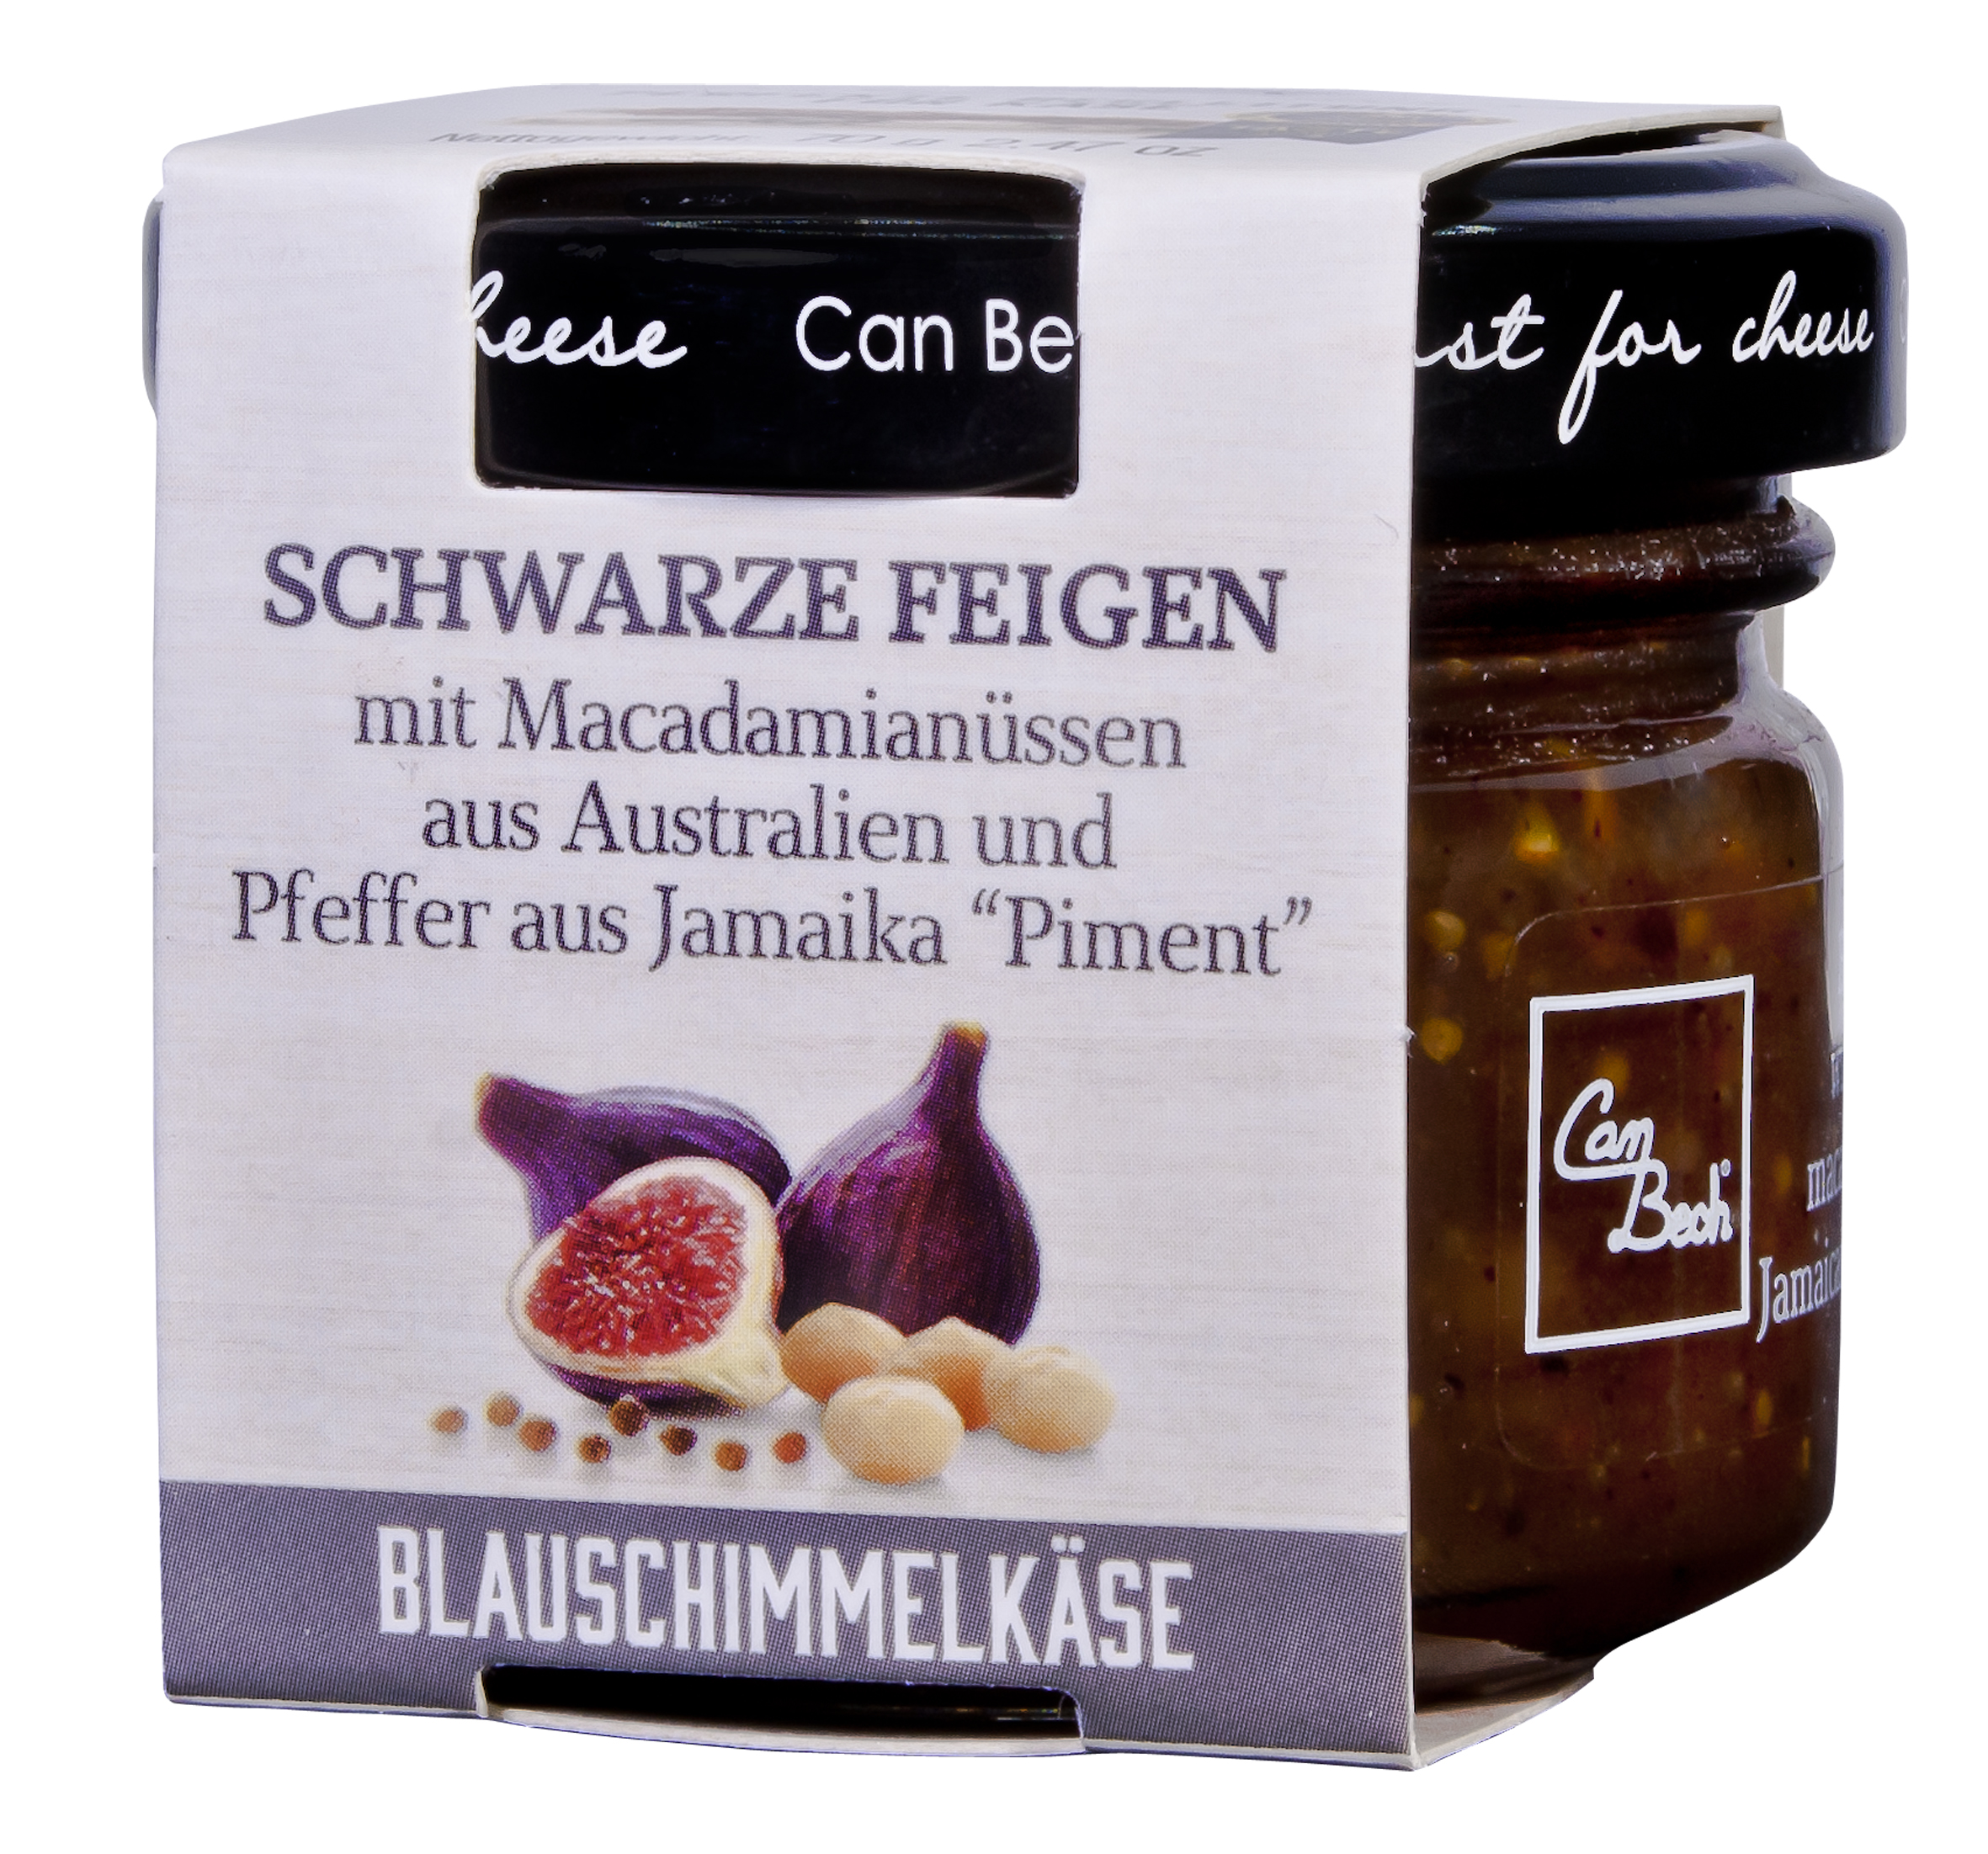  Just for Cheese schwarze Feige